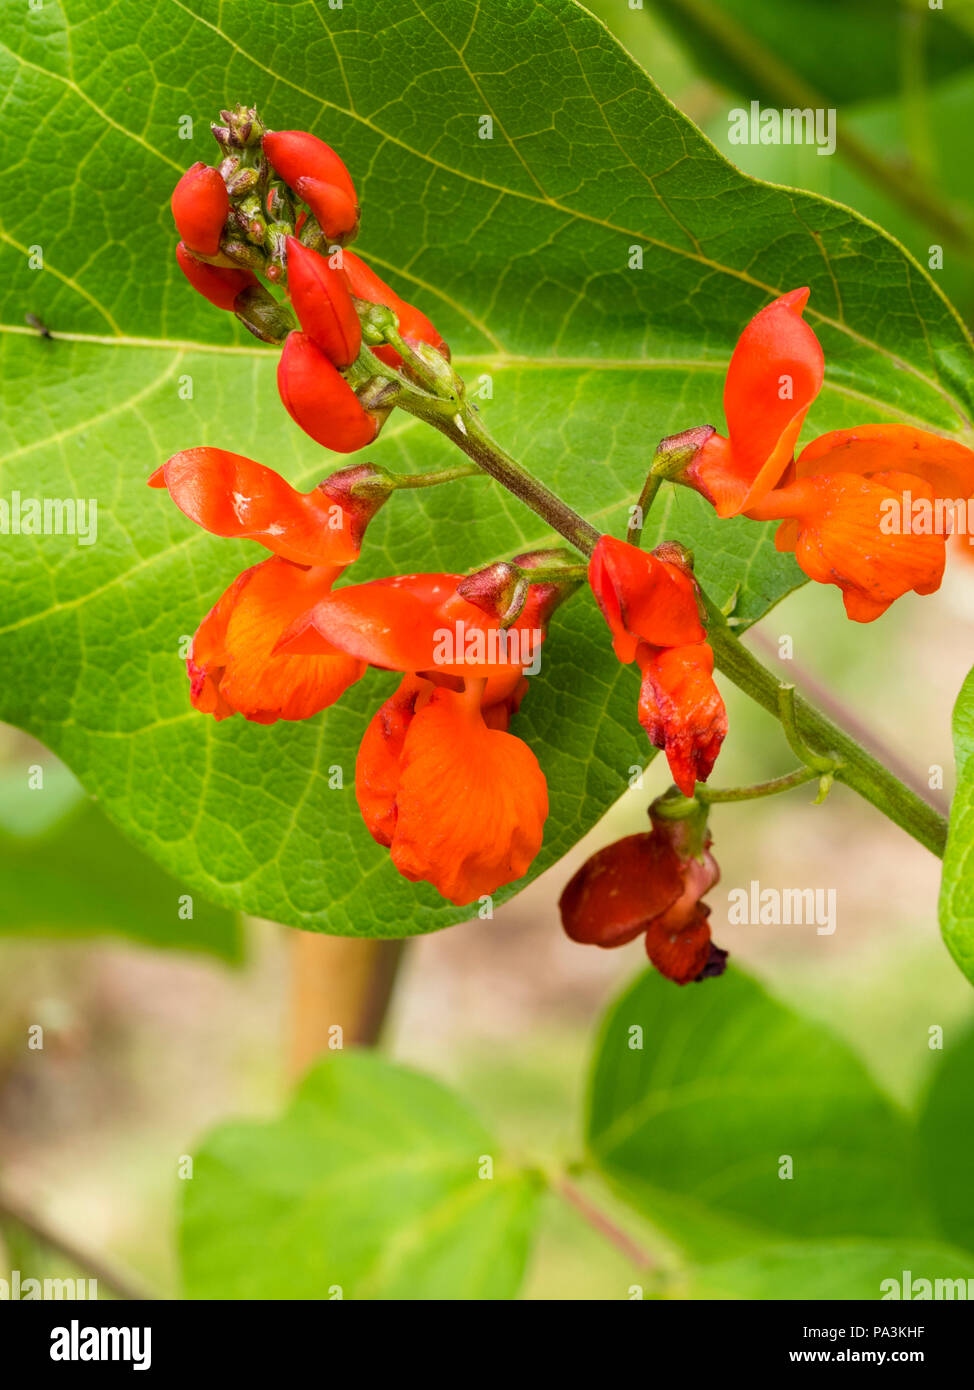 Ornamental red flowers of the runner bean, Phaseolus coccineus 'Lady Di' Stock Photo